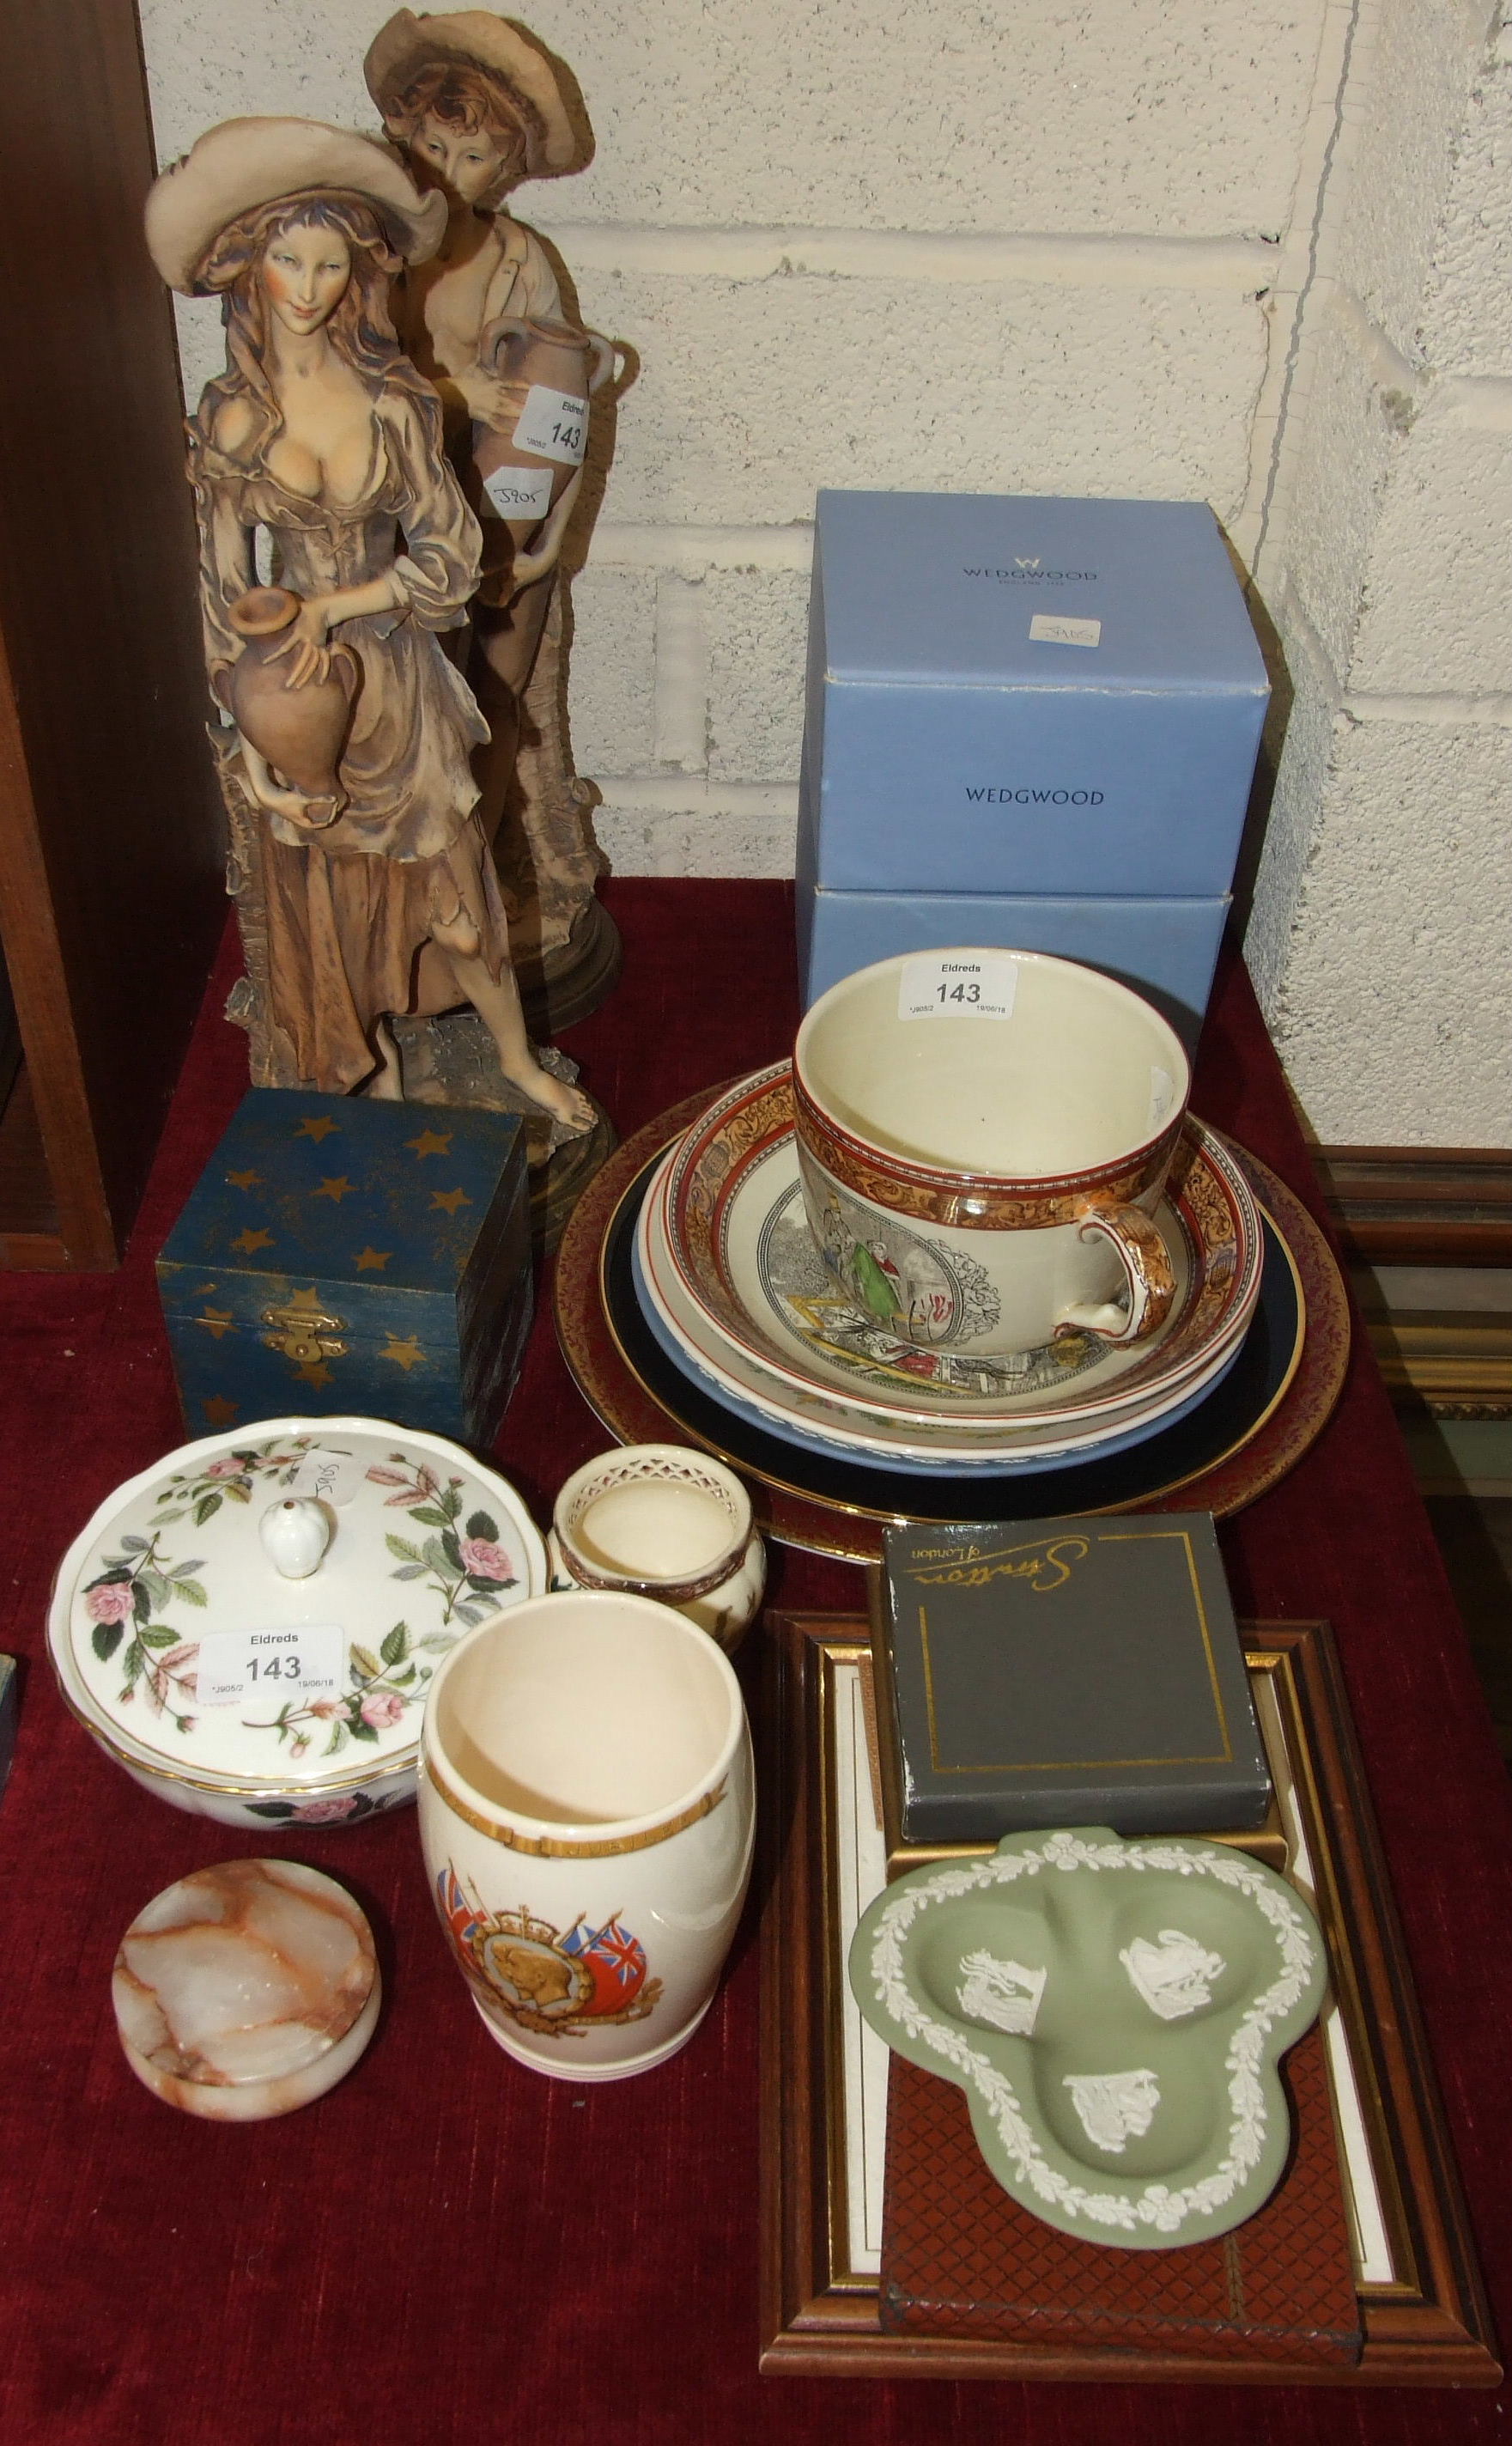 A large Adams cup and saucer with transfer-printed scenes from Oliver Twist, Wedgwood and other